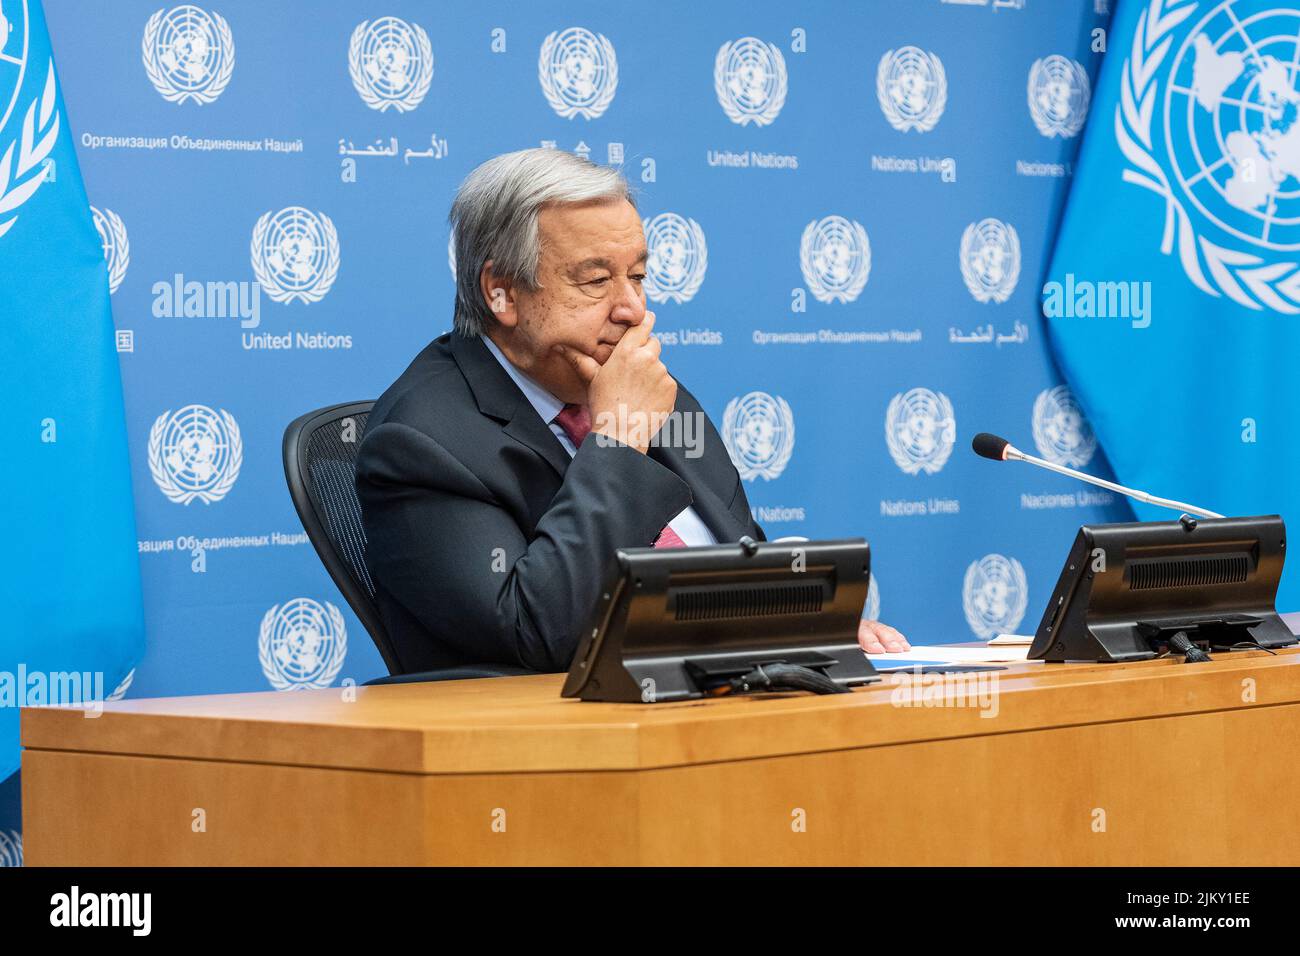 Secretary-General Antonio Guterres conducts a press briefing on the launch of the 3rd brief by the GCRG on Food, Energy and Finance at UN Headquarters in New York on August 3, 2022. Report by Global Crisis Response Group and Rebeca Grynspan who joined virtually from Geneva highlighted global insecurity on shortage of food, energy and finance after COVID-19 pandemic and exacerbated by war Russia is waging on Ukraine. Secretary-General and Ms. Grynspan urged all countries to conserve energy, invest more into renewable energy sources, tax excessive profits by oil and gas companies and distribute Stock Photo